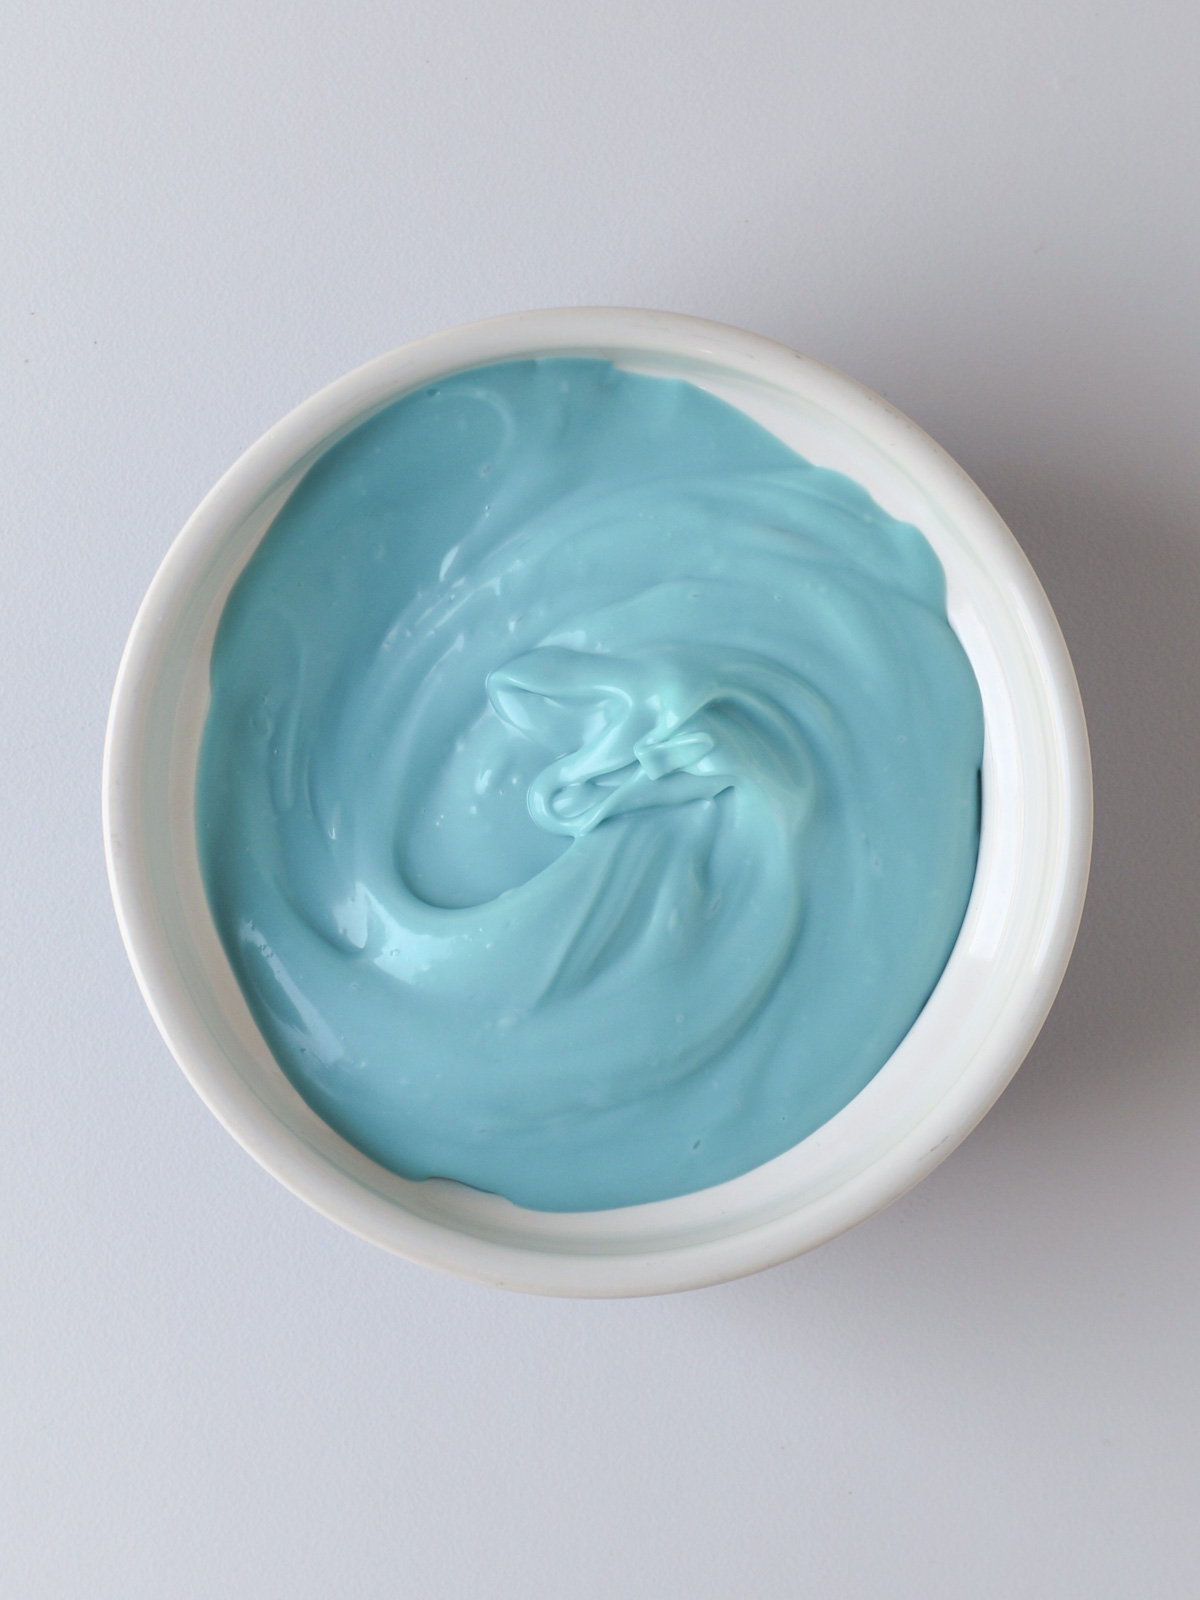 melted blue candy melts in white dish.